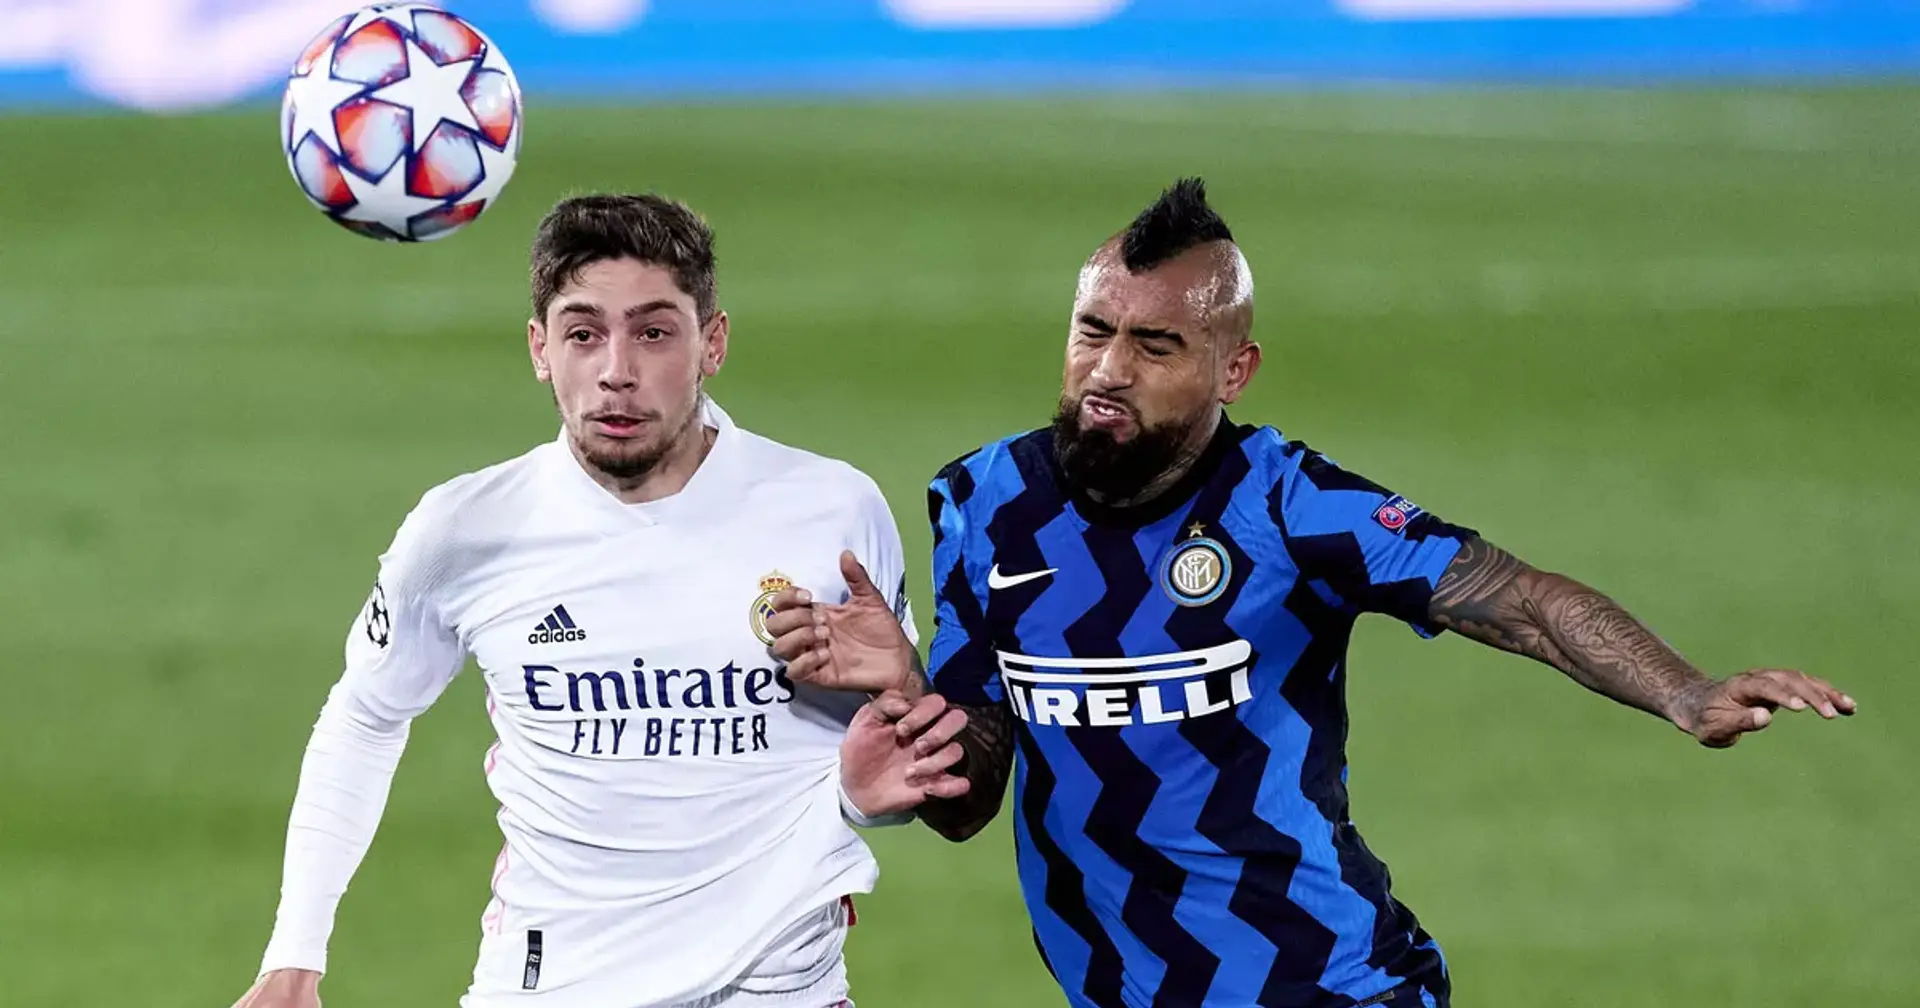 Inter Milan vs Real Madrid: line-ups, score predictions, head-to-head record & more — preview